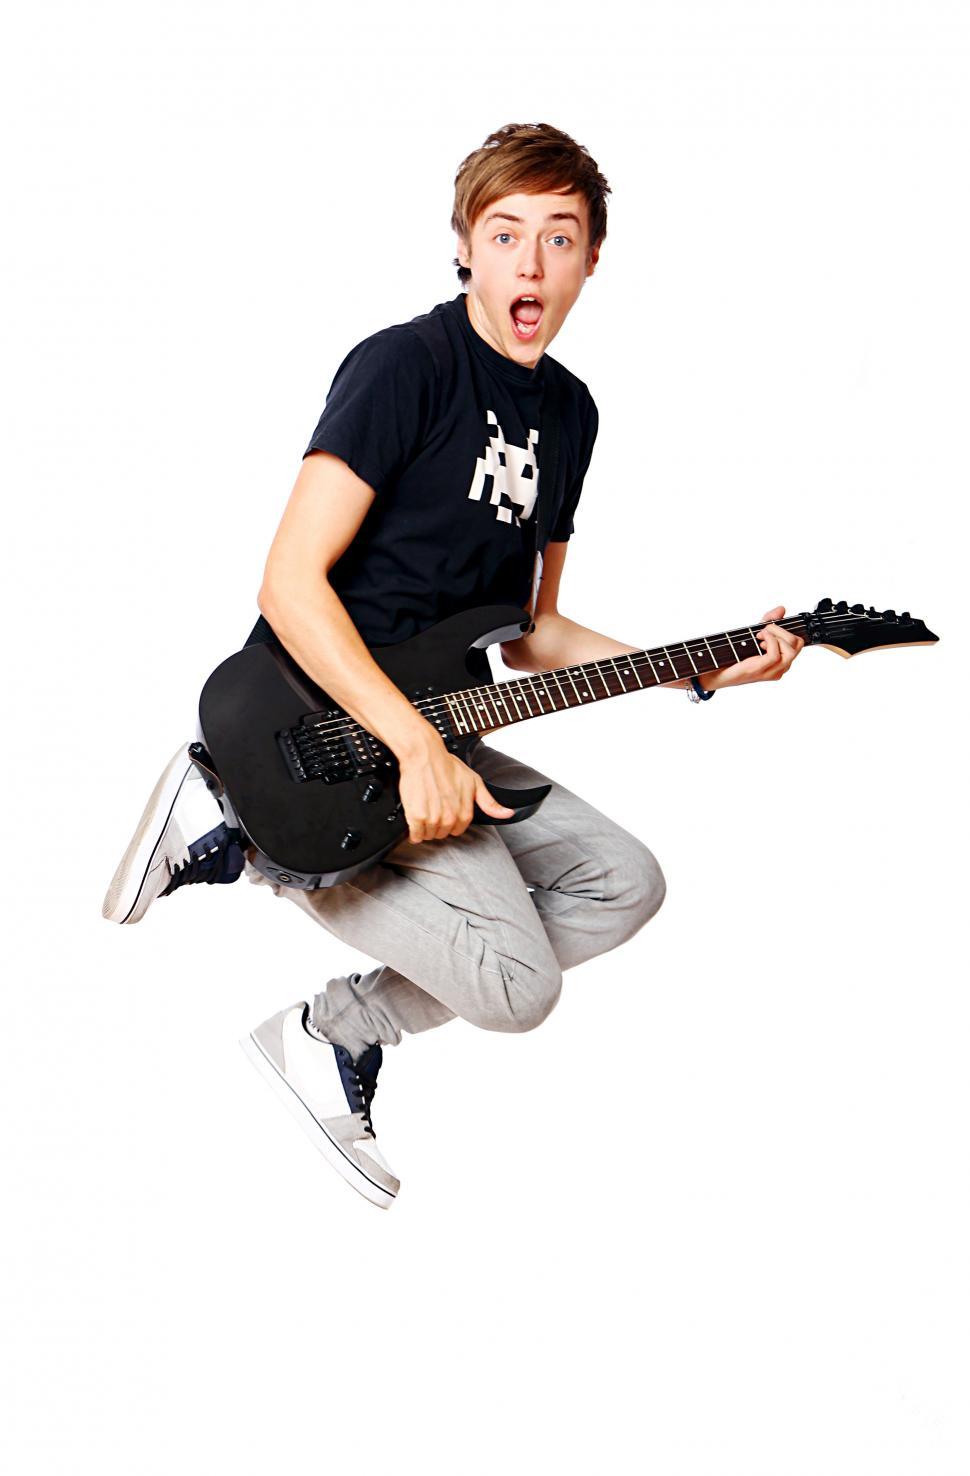 Free Image of Teenager jumping with electric guitar 